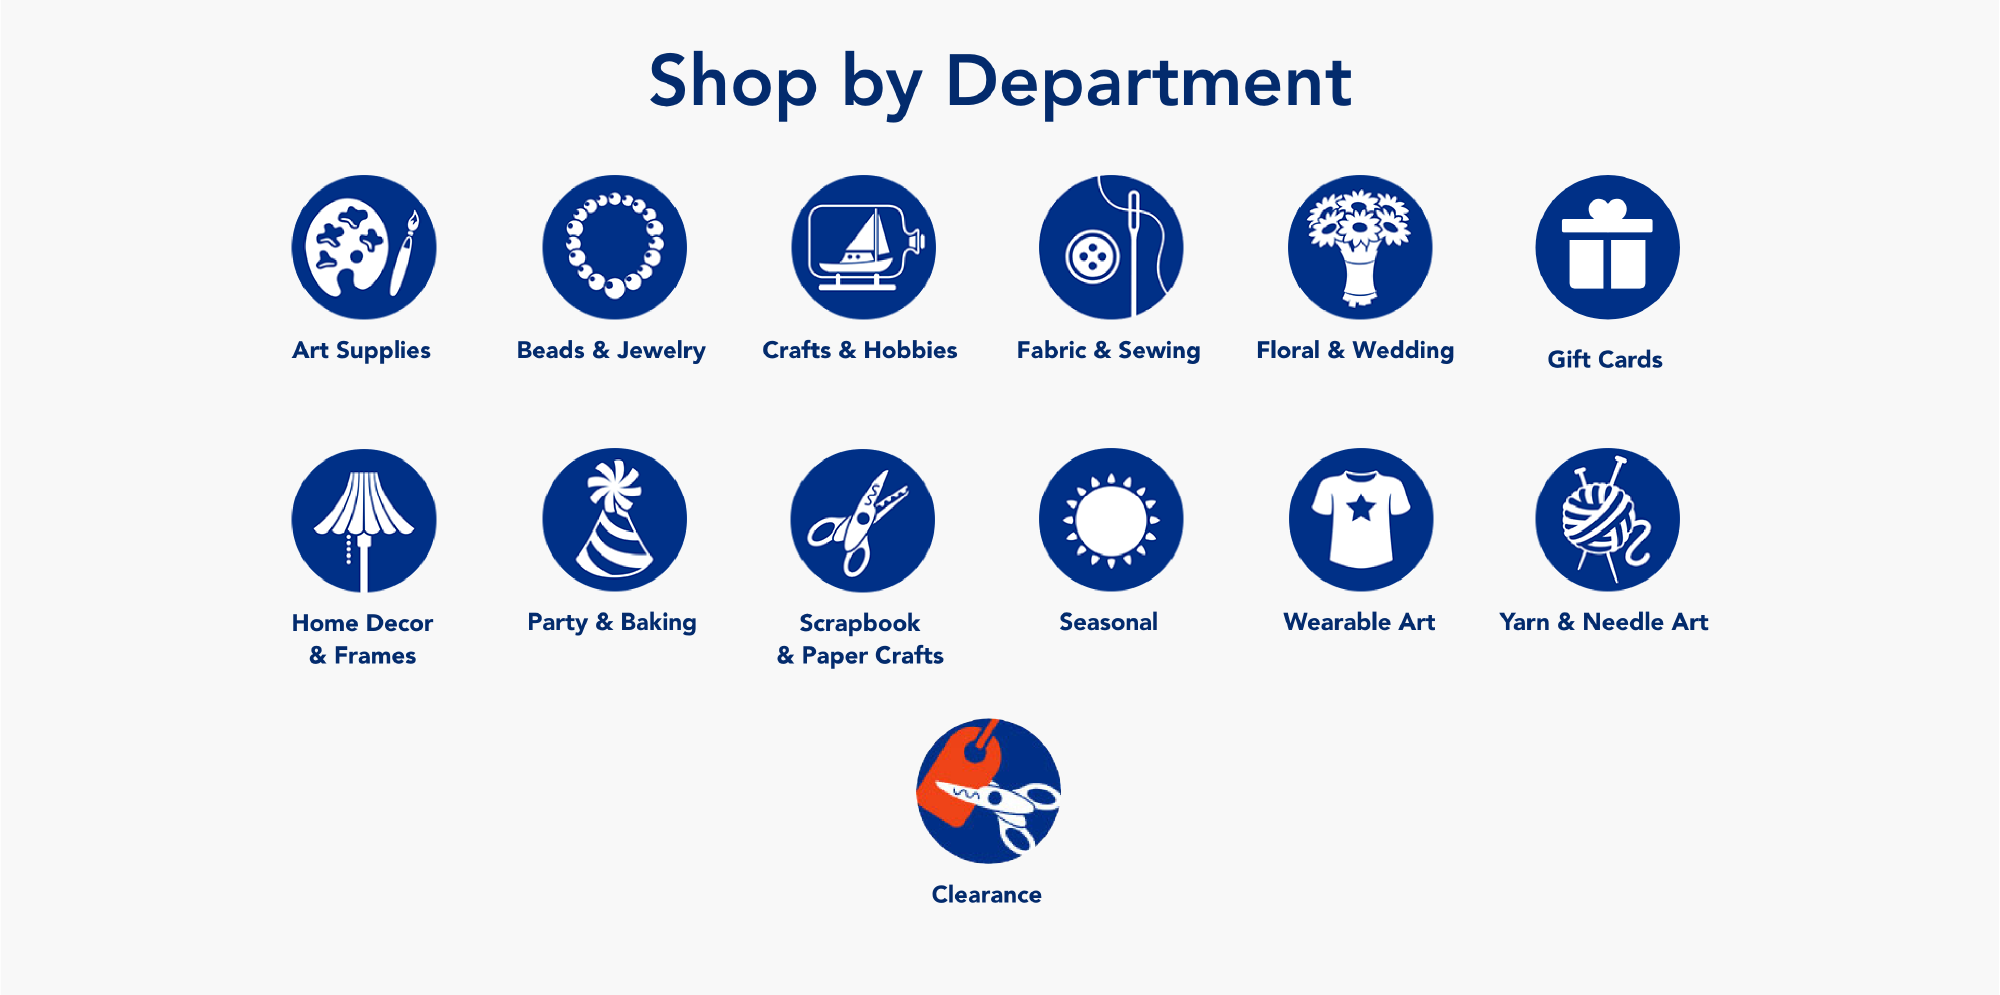 Simplified Departments section using icons instead of pictures.